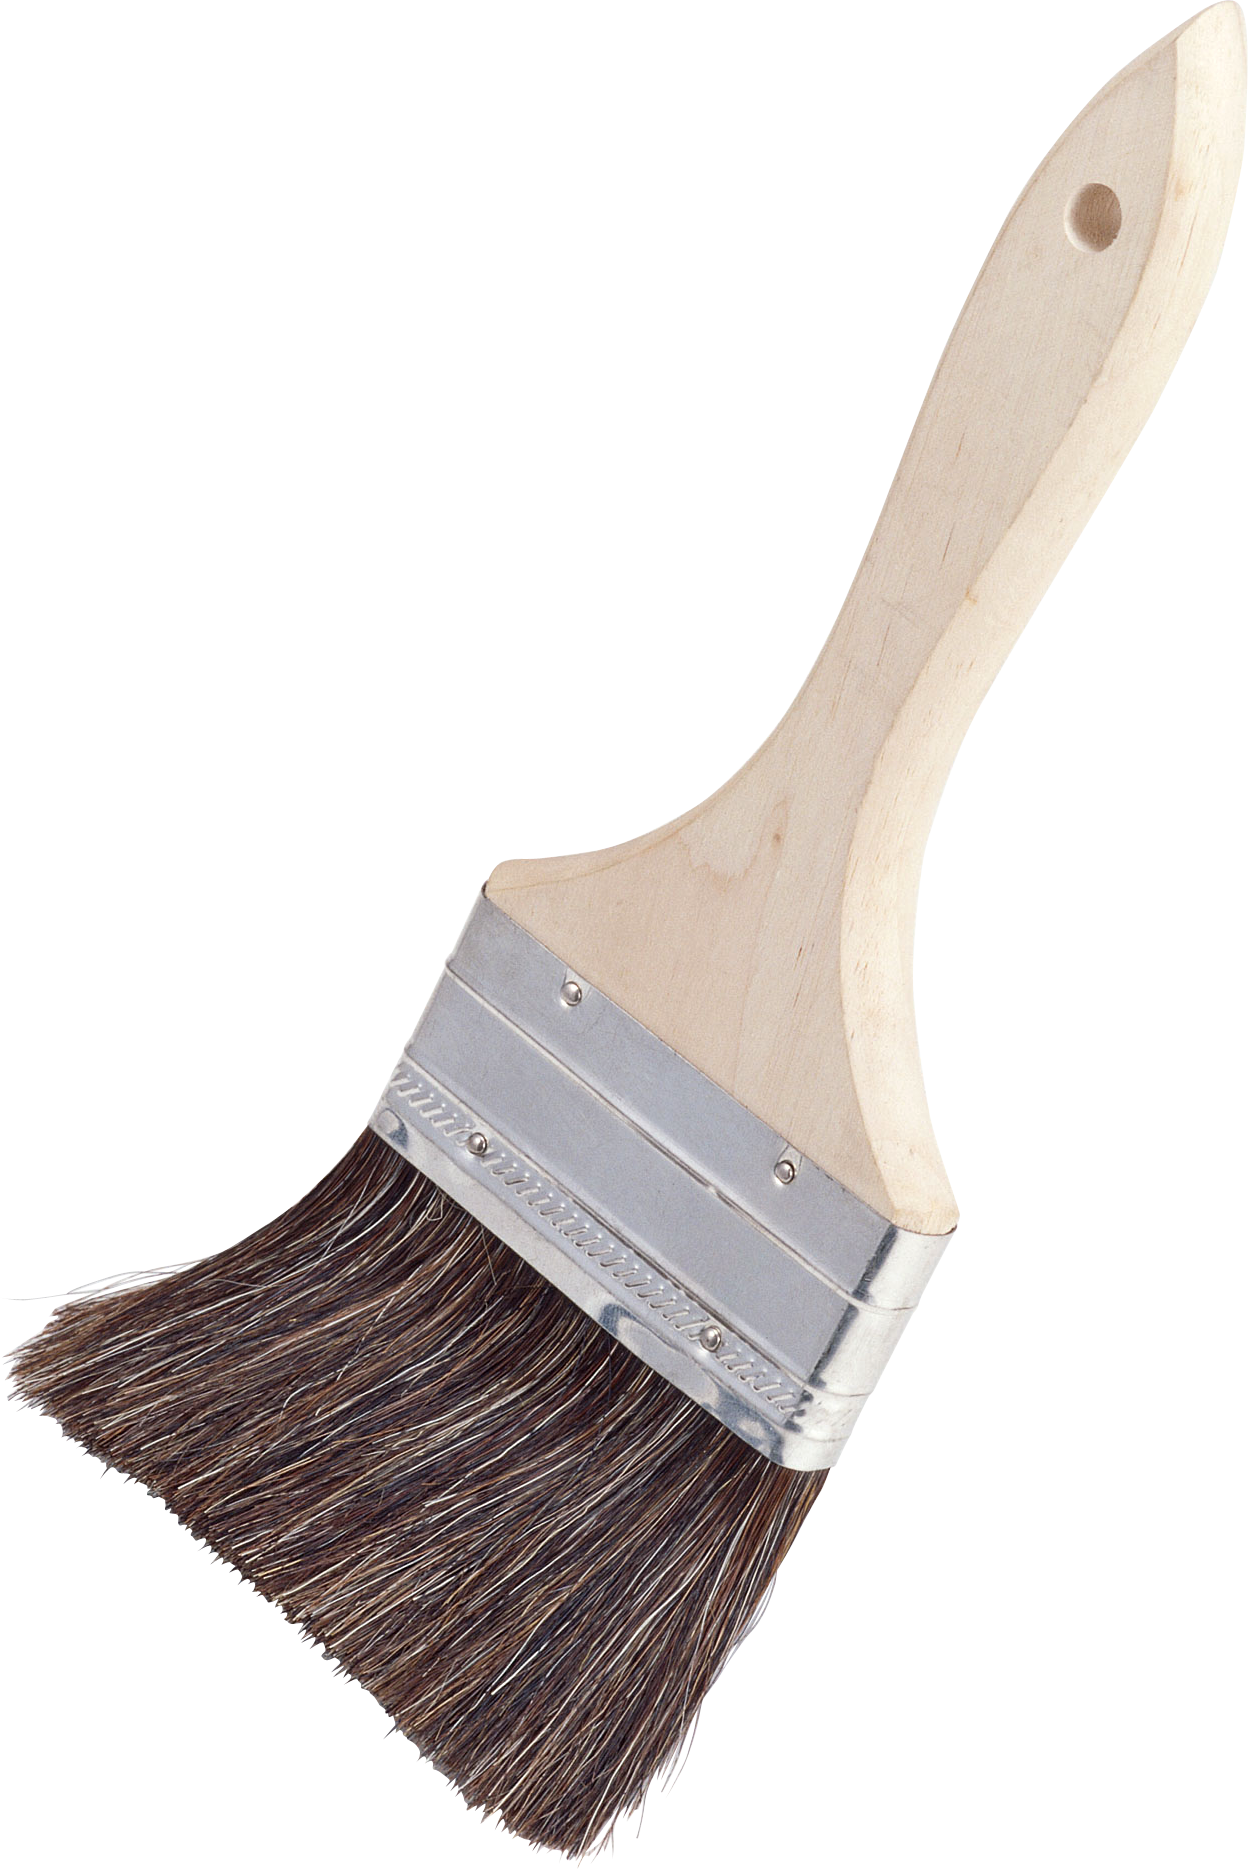 Paintbrush Painting Paint Brush Png Image Png Download 12481869